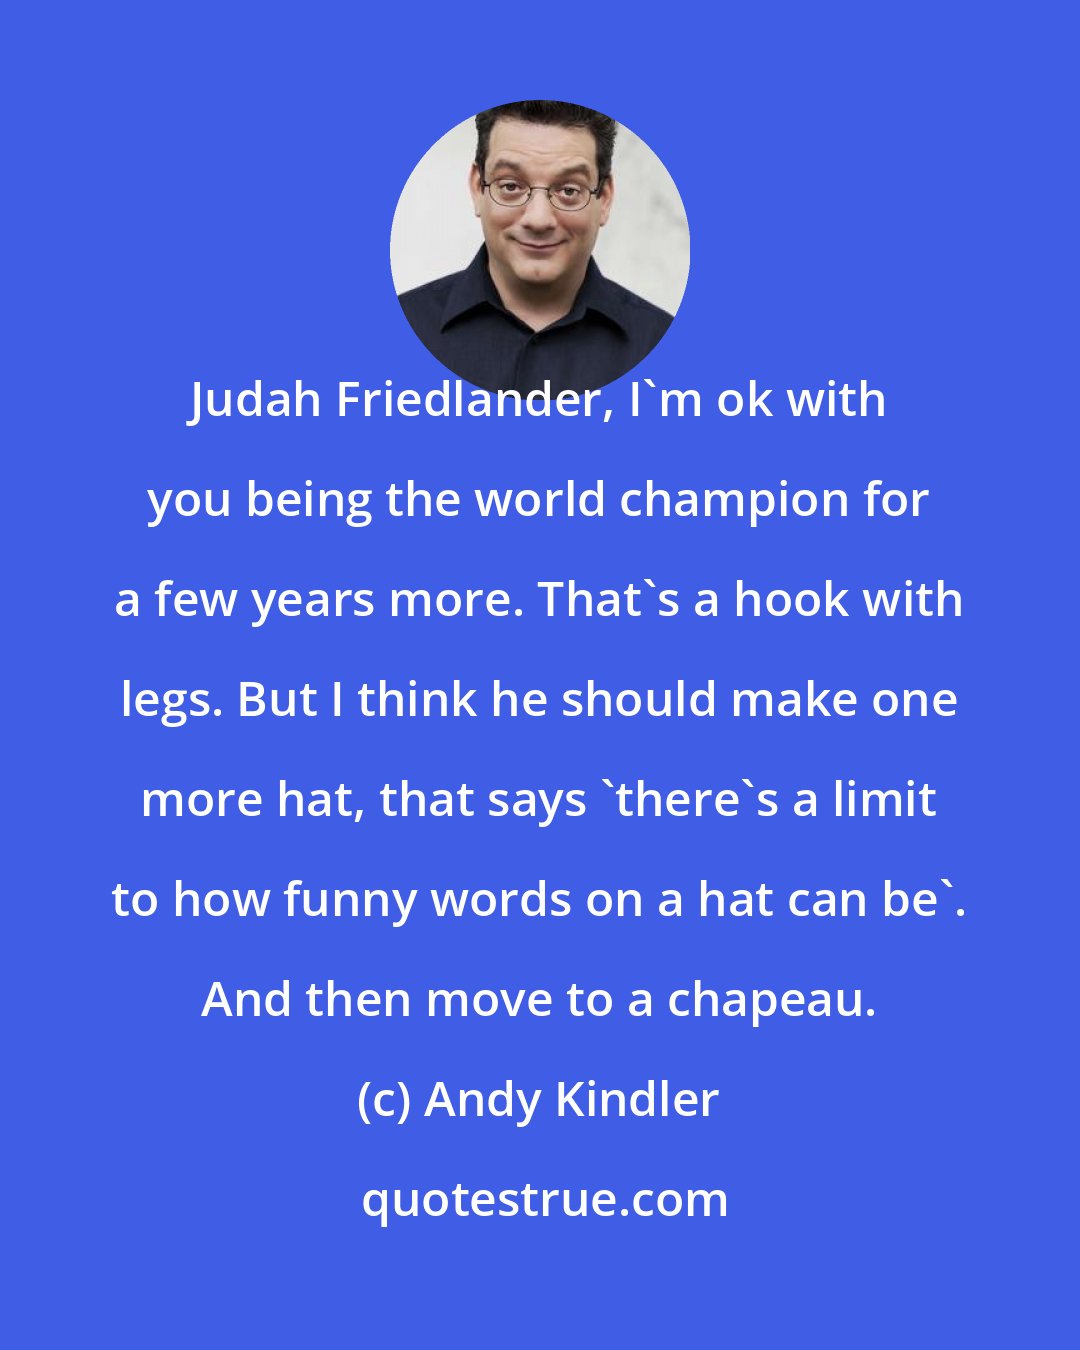 Andy Kindler: Judah Friedlander, I'm ok with you being the world champion for a few years more. That's a hook with legs. But I think he should make one more hat, that says 'there's a limit to how funny words on a hat can be'. And then move to a chapeau.